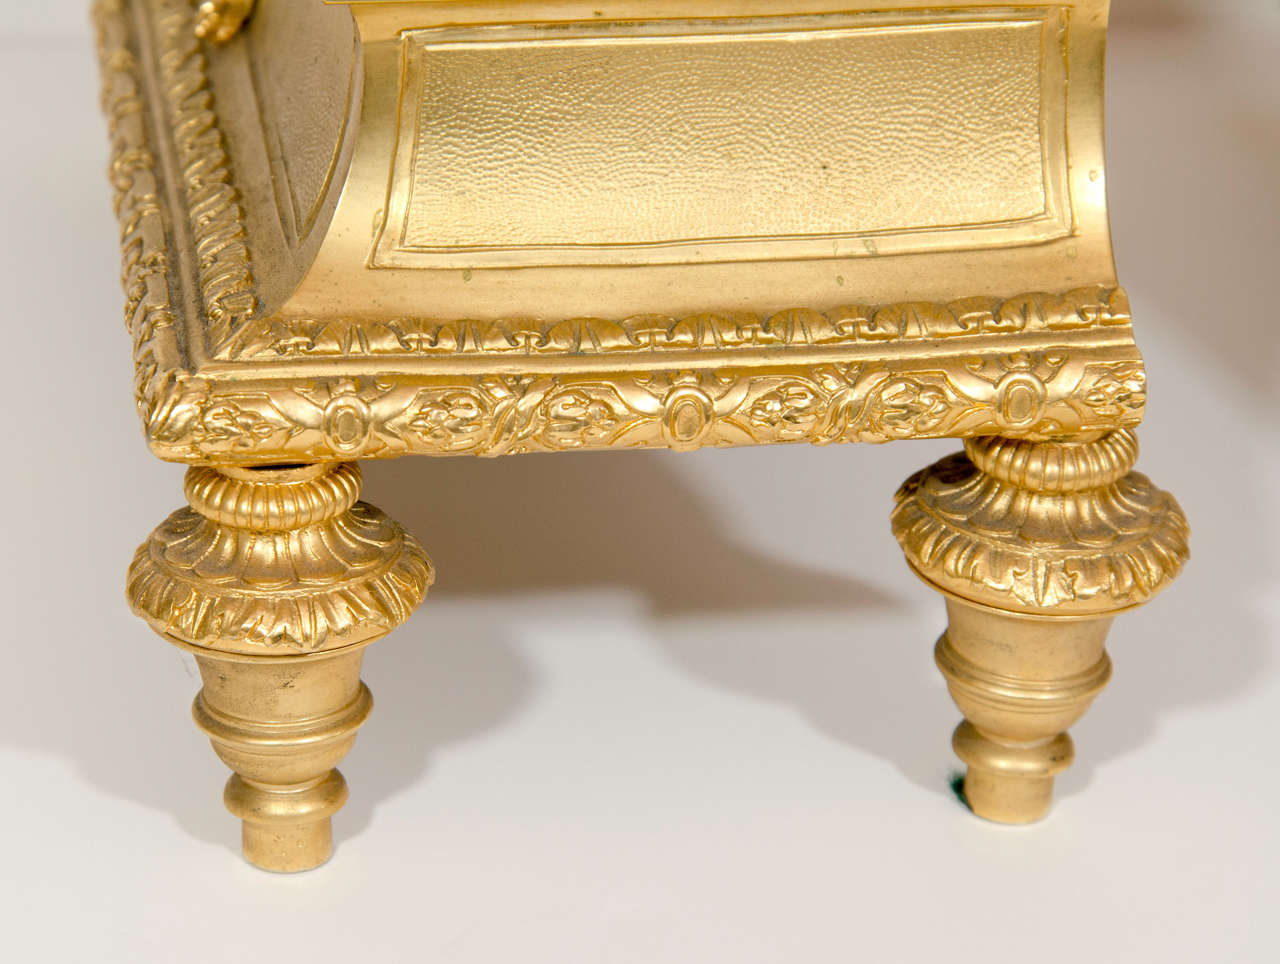 Pair of Rare & Large Antique French Louis XVI Gilt Bronze Figural Andirons, 19th Century For Sale 1